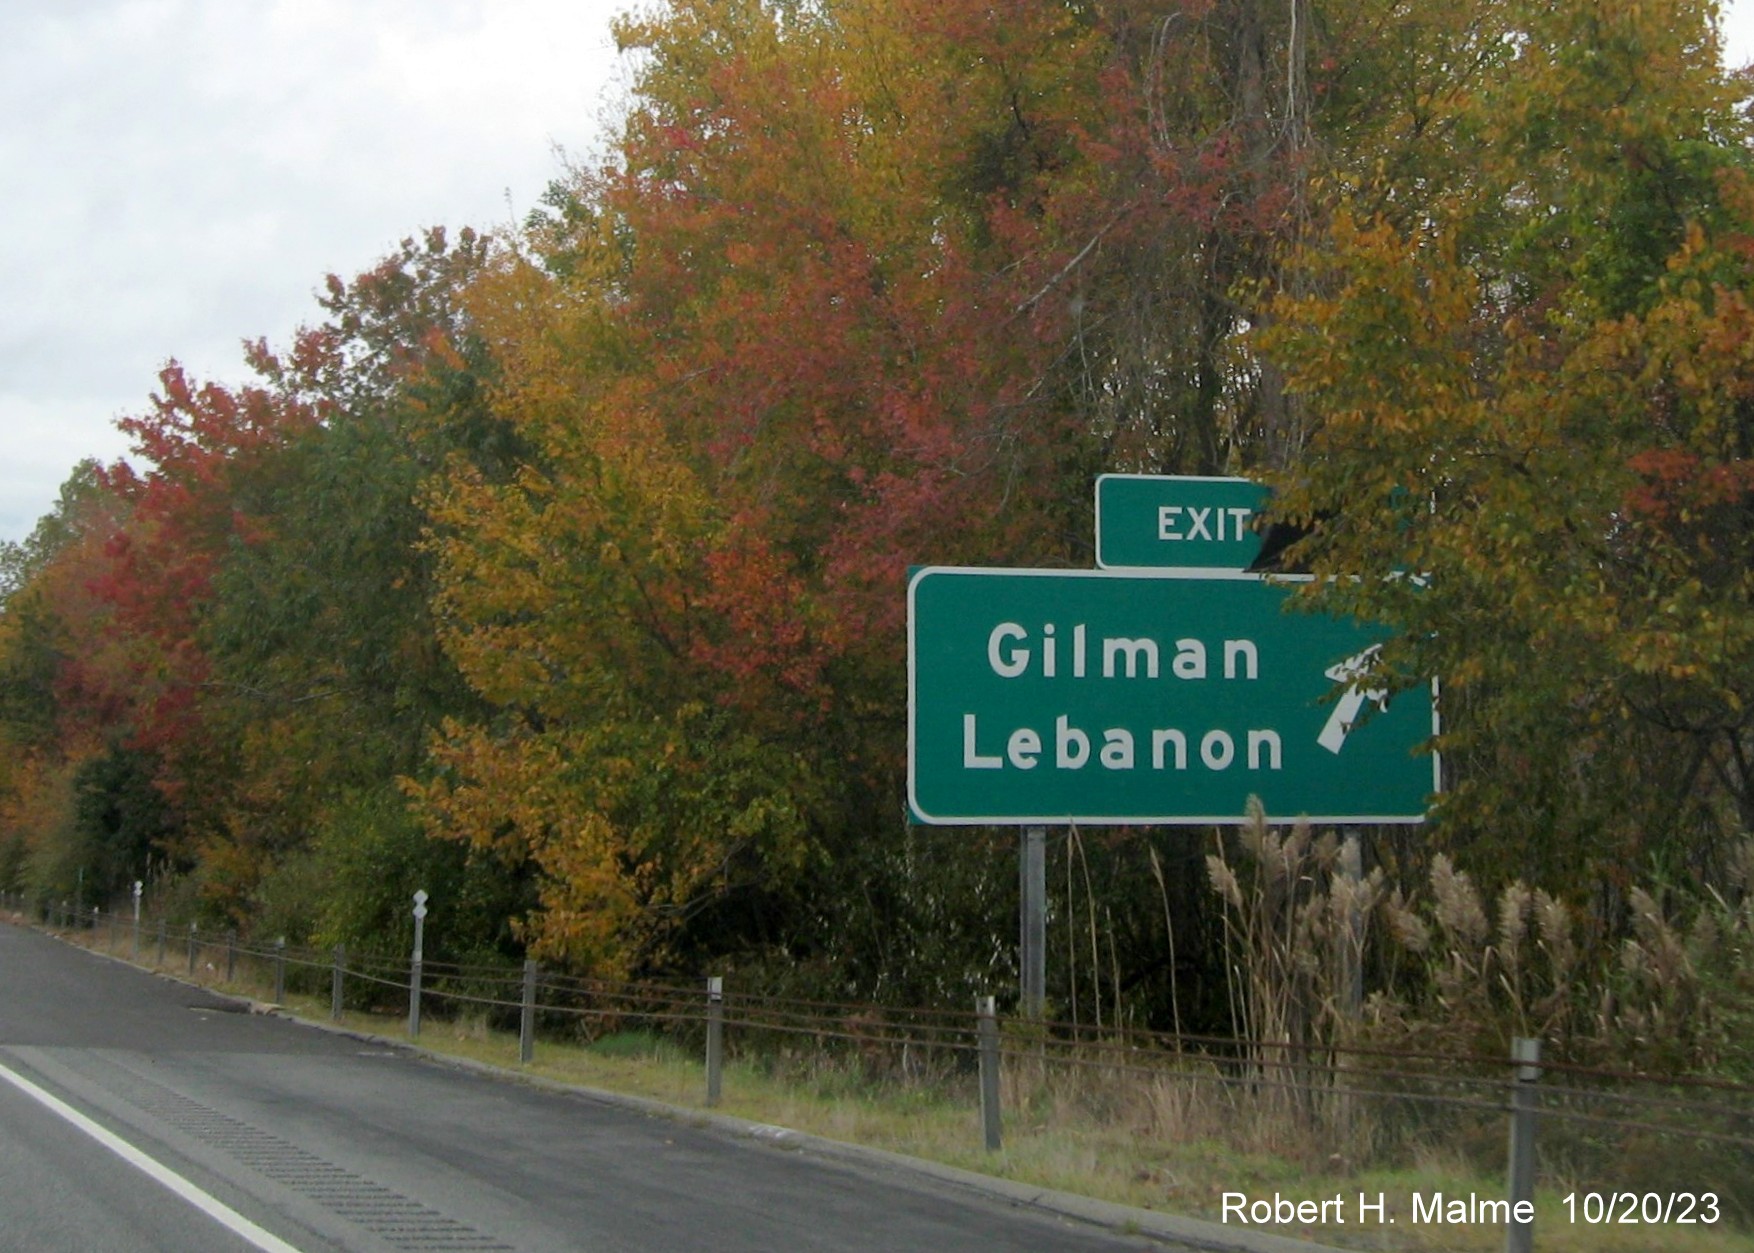 Image of new ground mounted ramp sign for Gilman/Lebanon exit on CT 2 West with covered 
      over future exit number (33) and also Old Exit 23 sign, October 2023